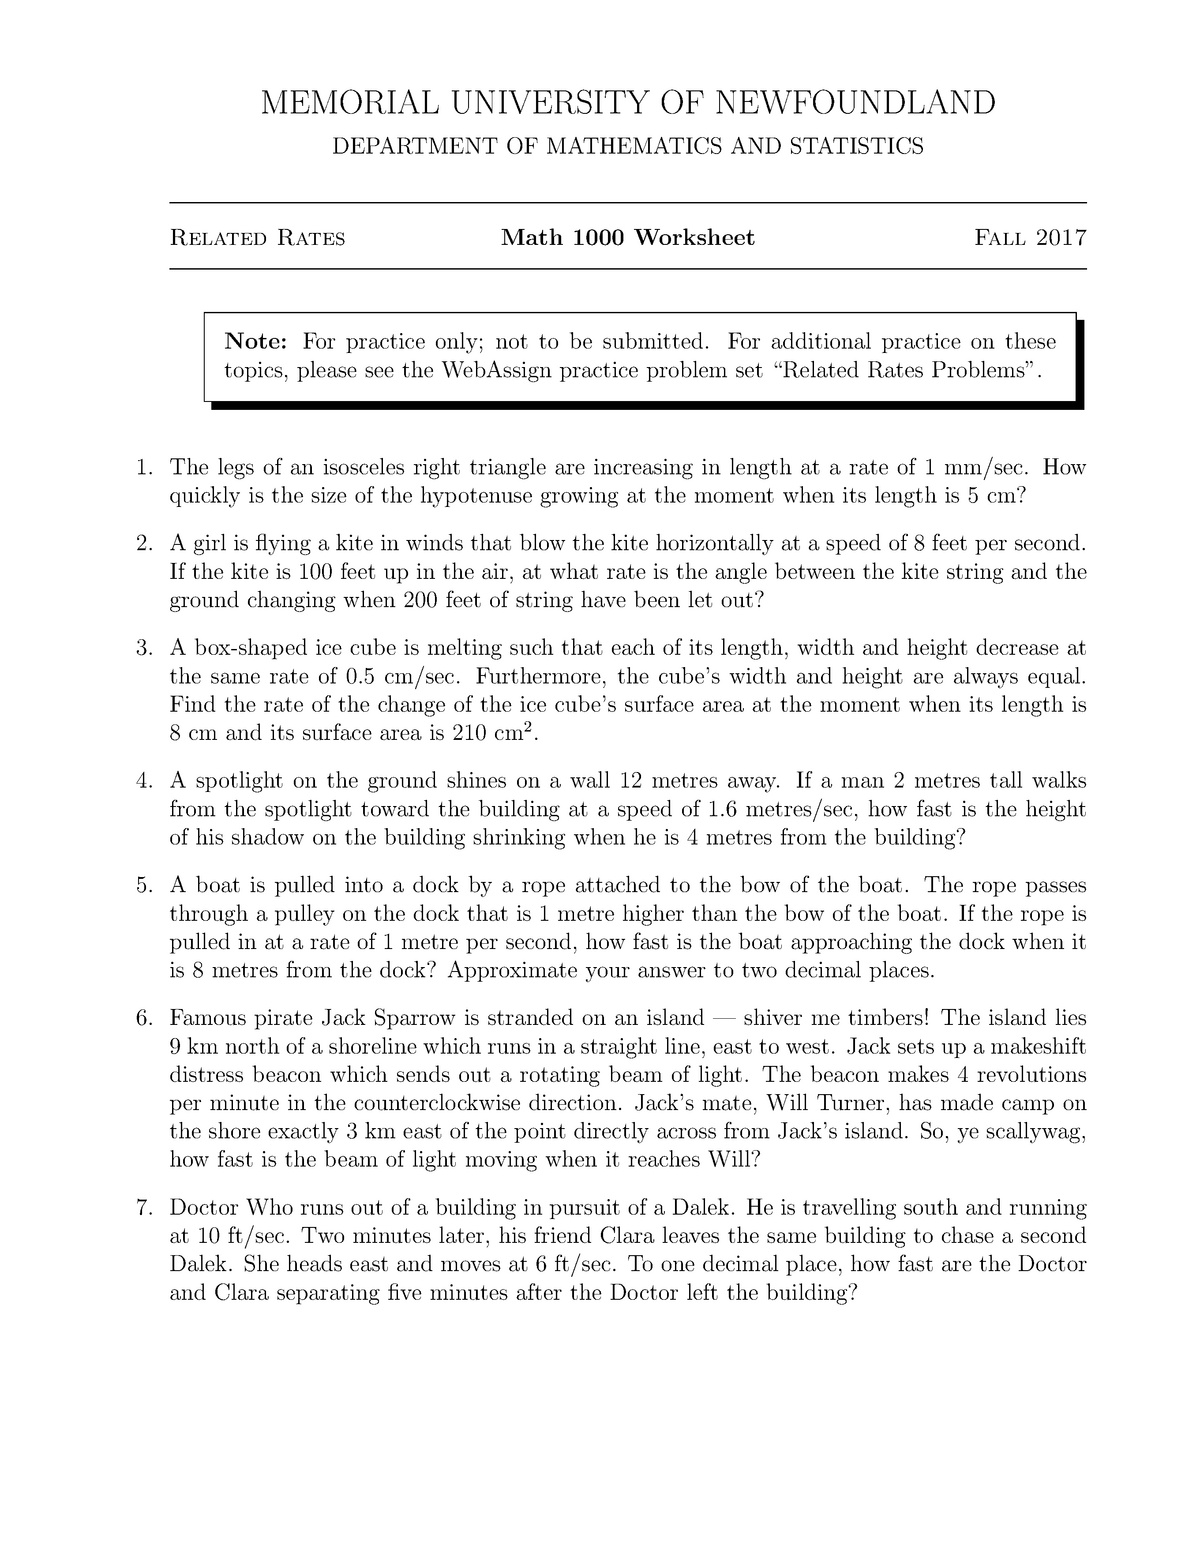 Worksheet on Related Rates Problems MEMORIAL UNIVERSITY OF NEWFOUNDLAND